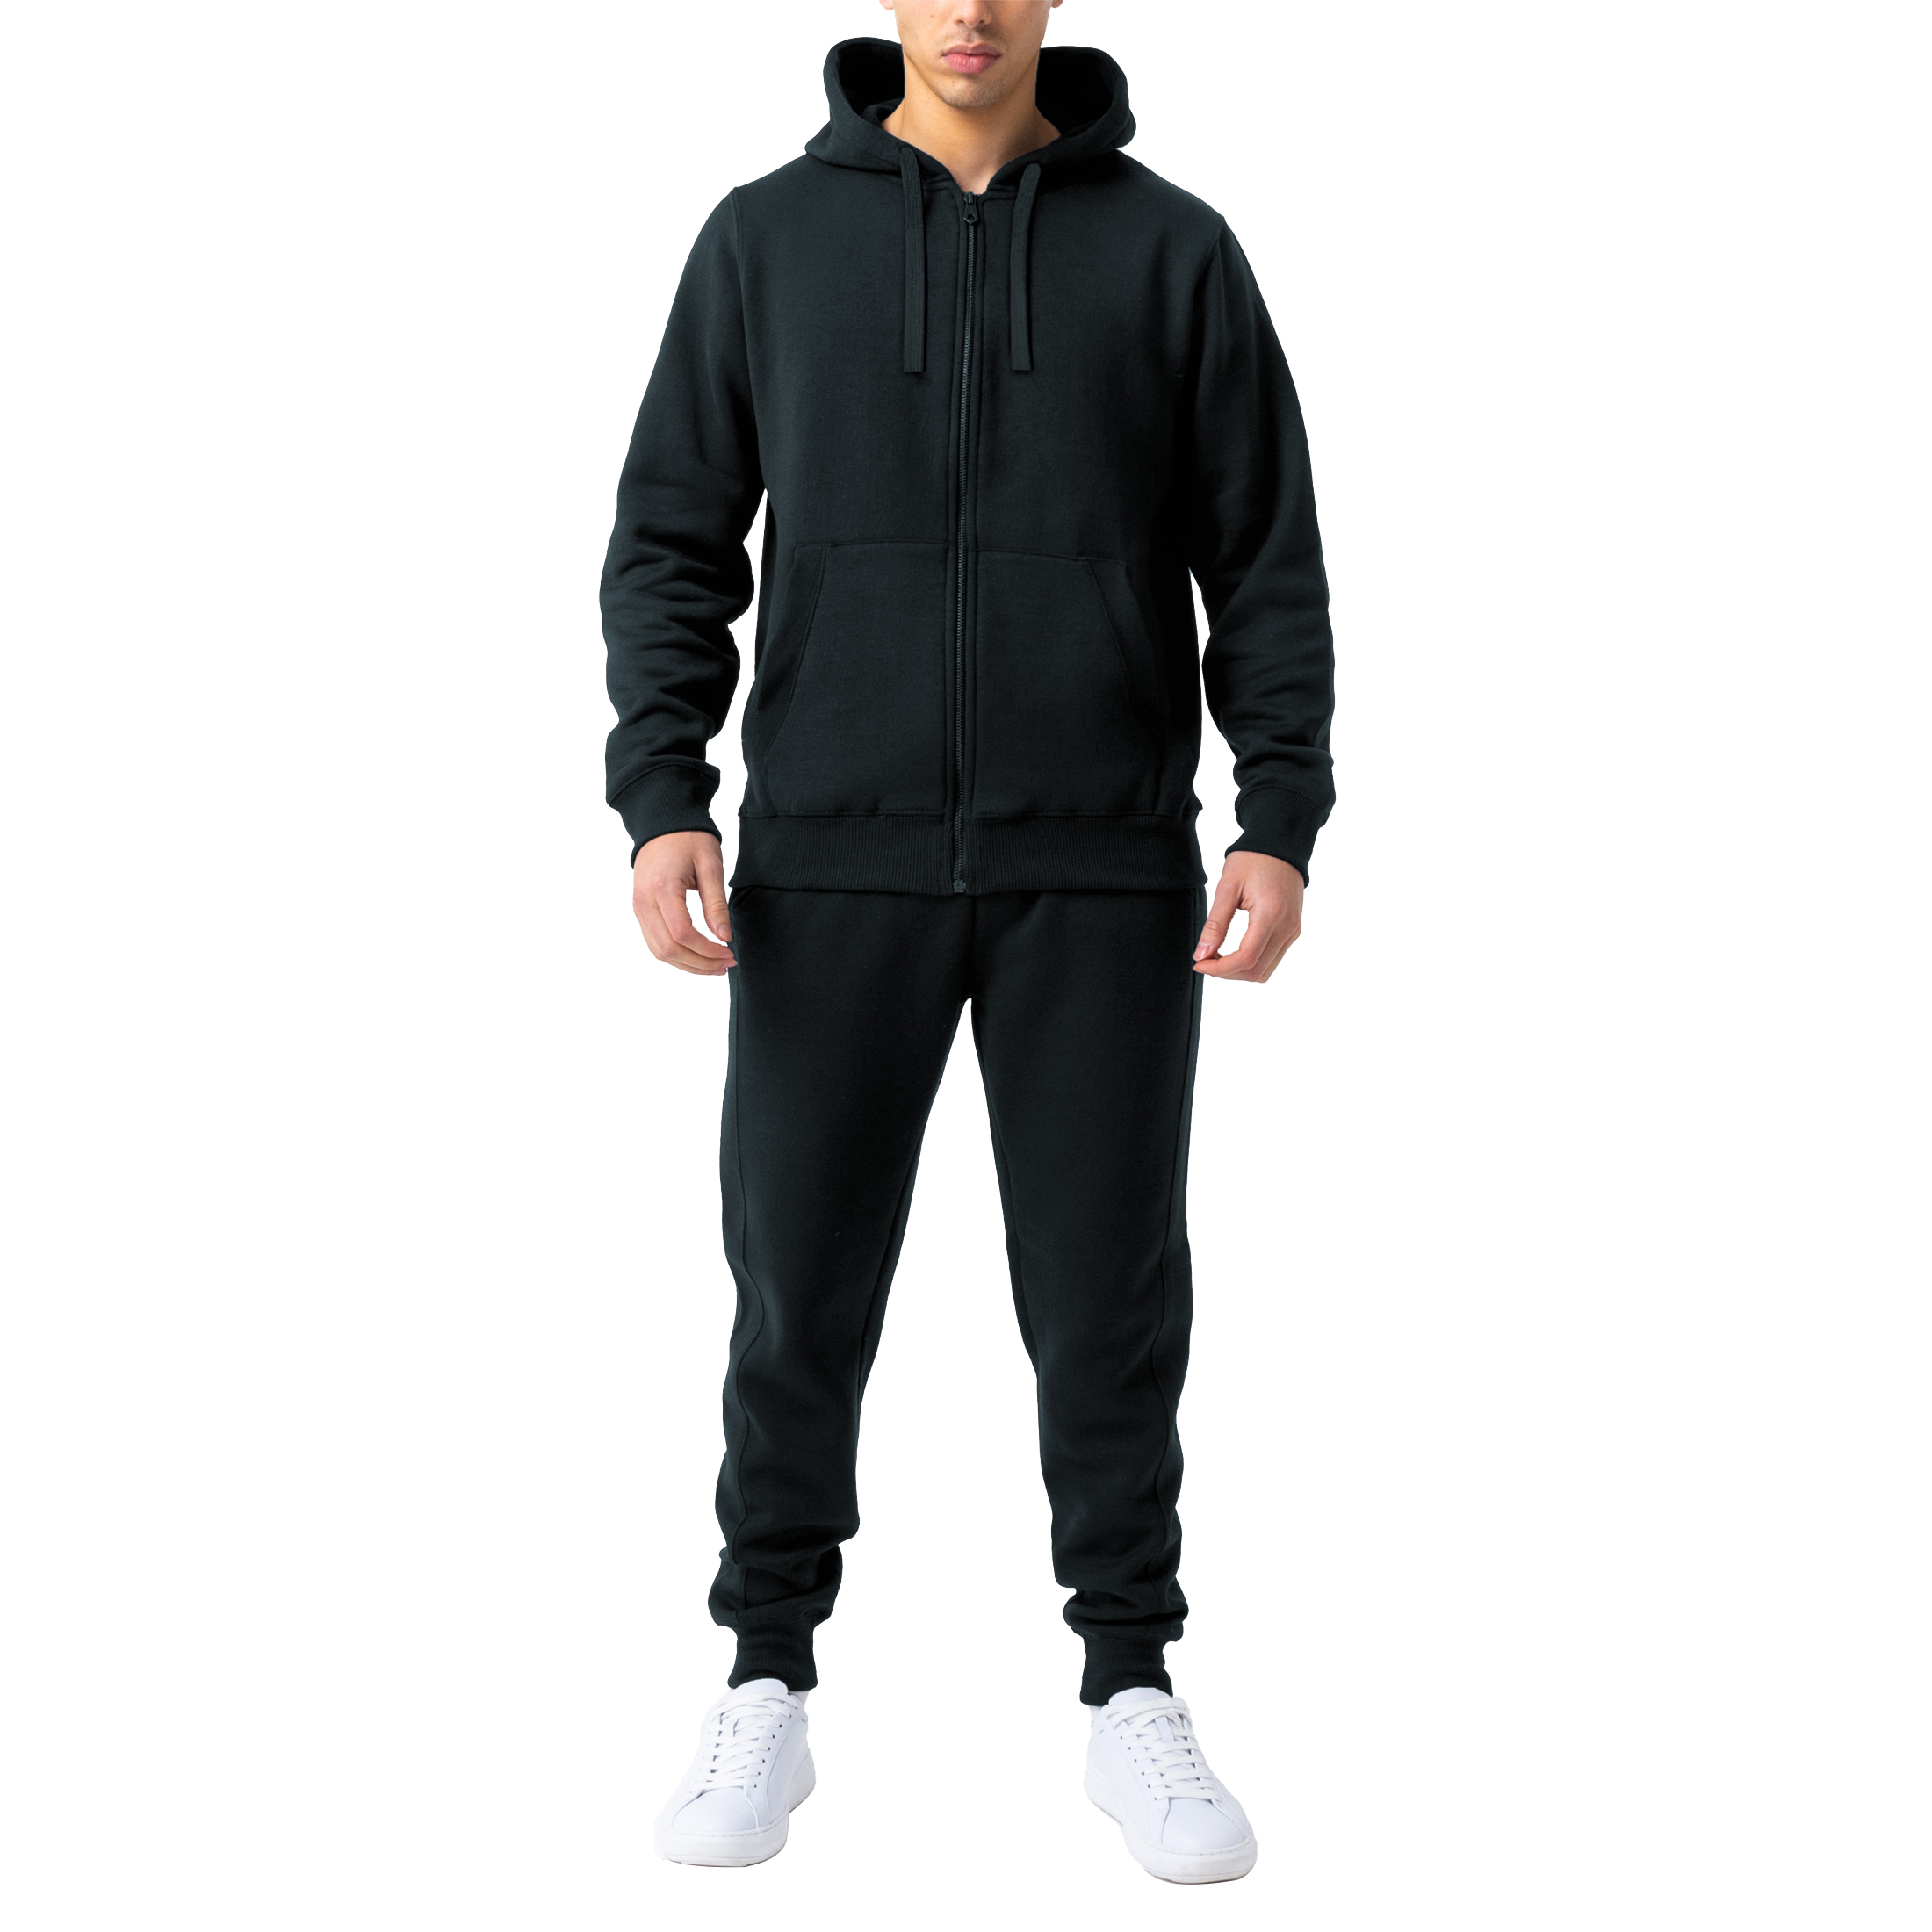 Men's Casual Jogging Athletic Active Full Zip Up Tracksuit - Black, Small